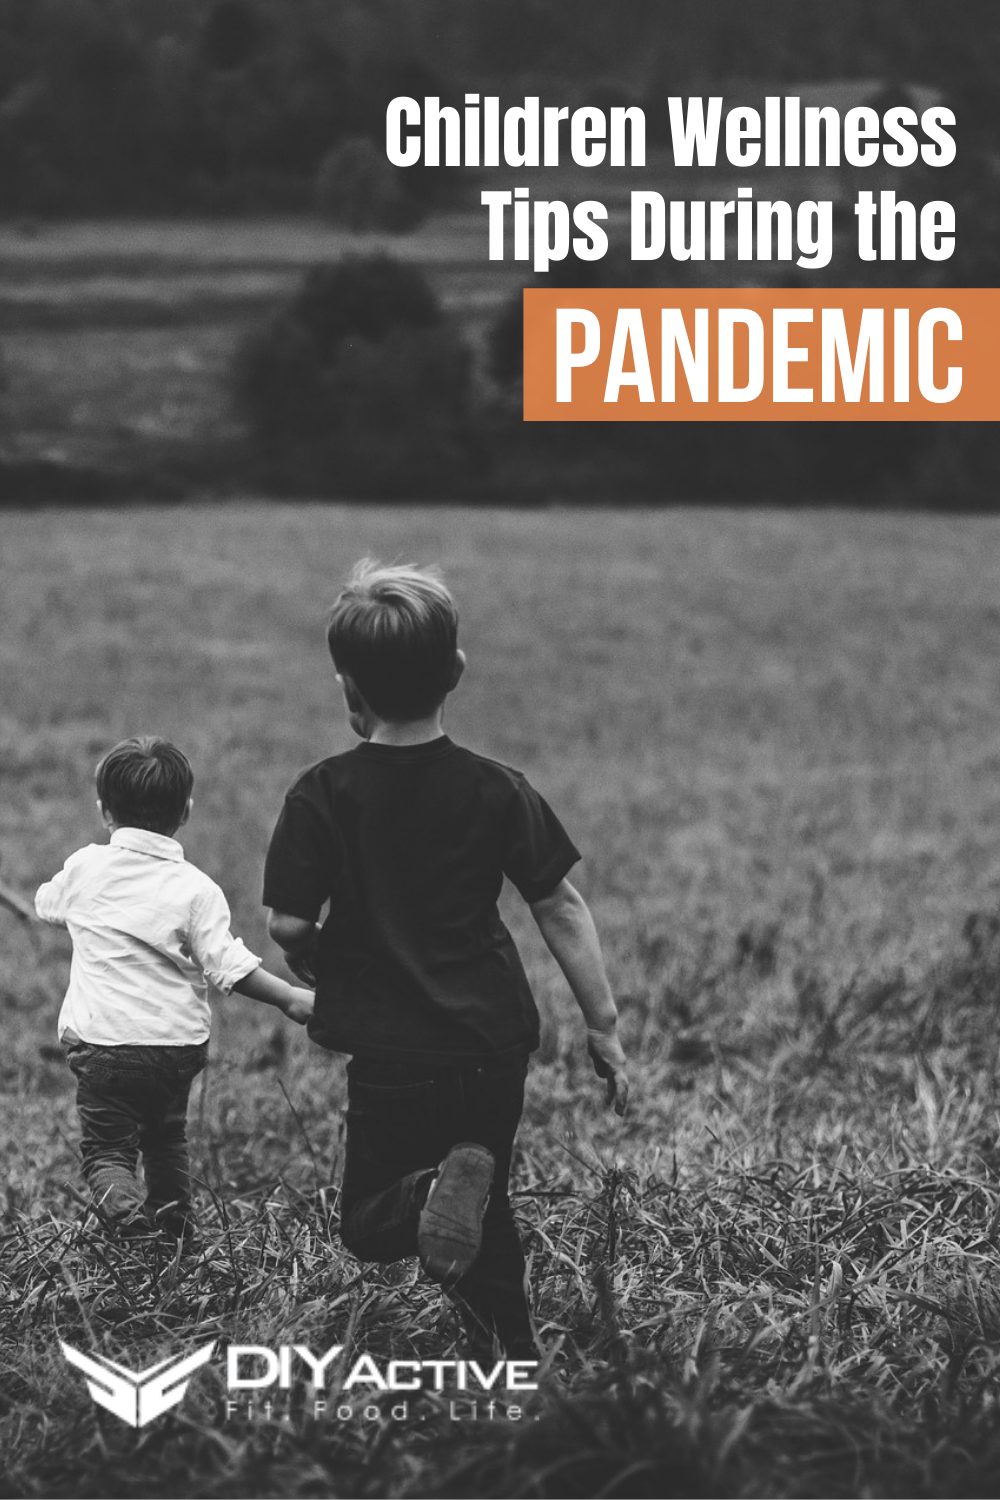 Children Wellness Tips During the Pandemic